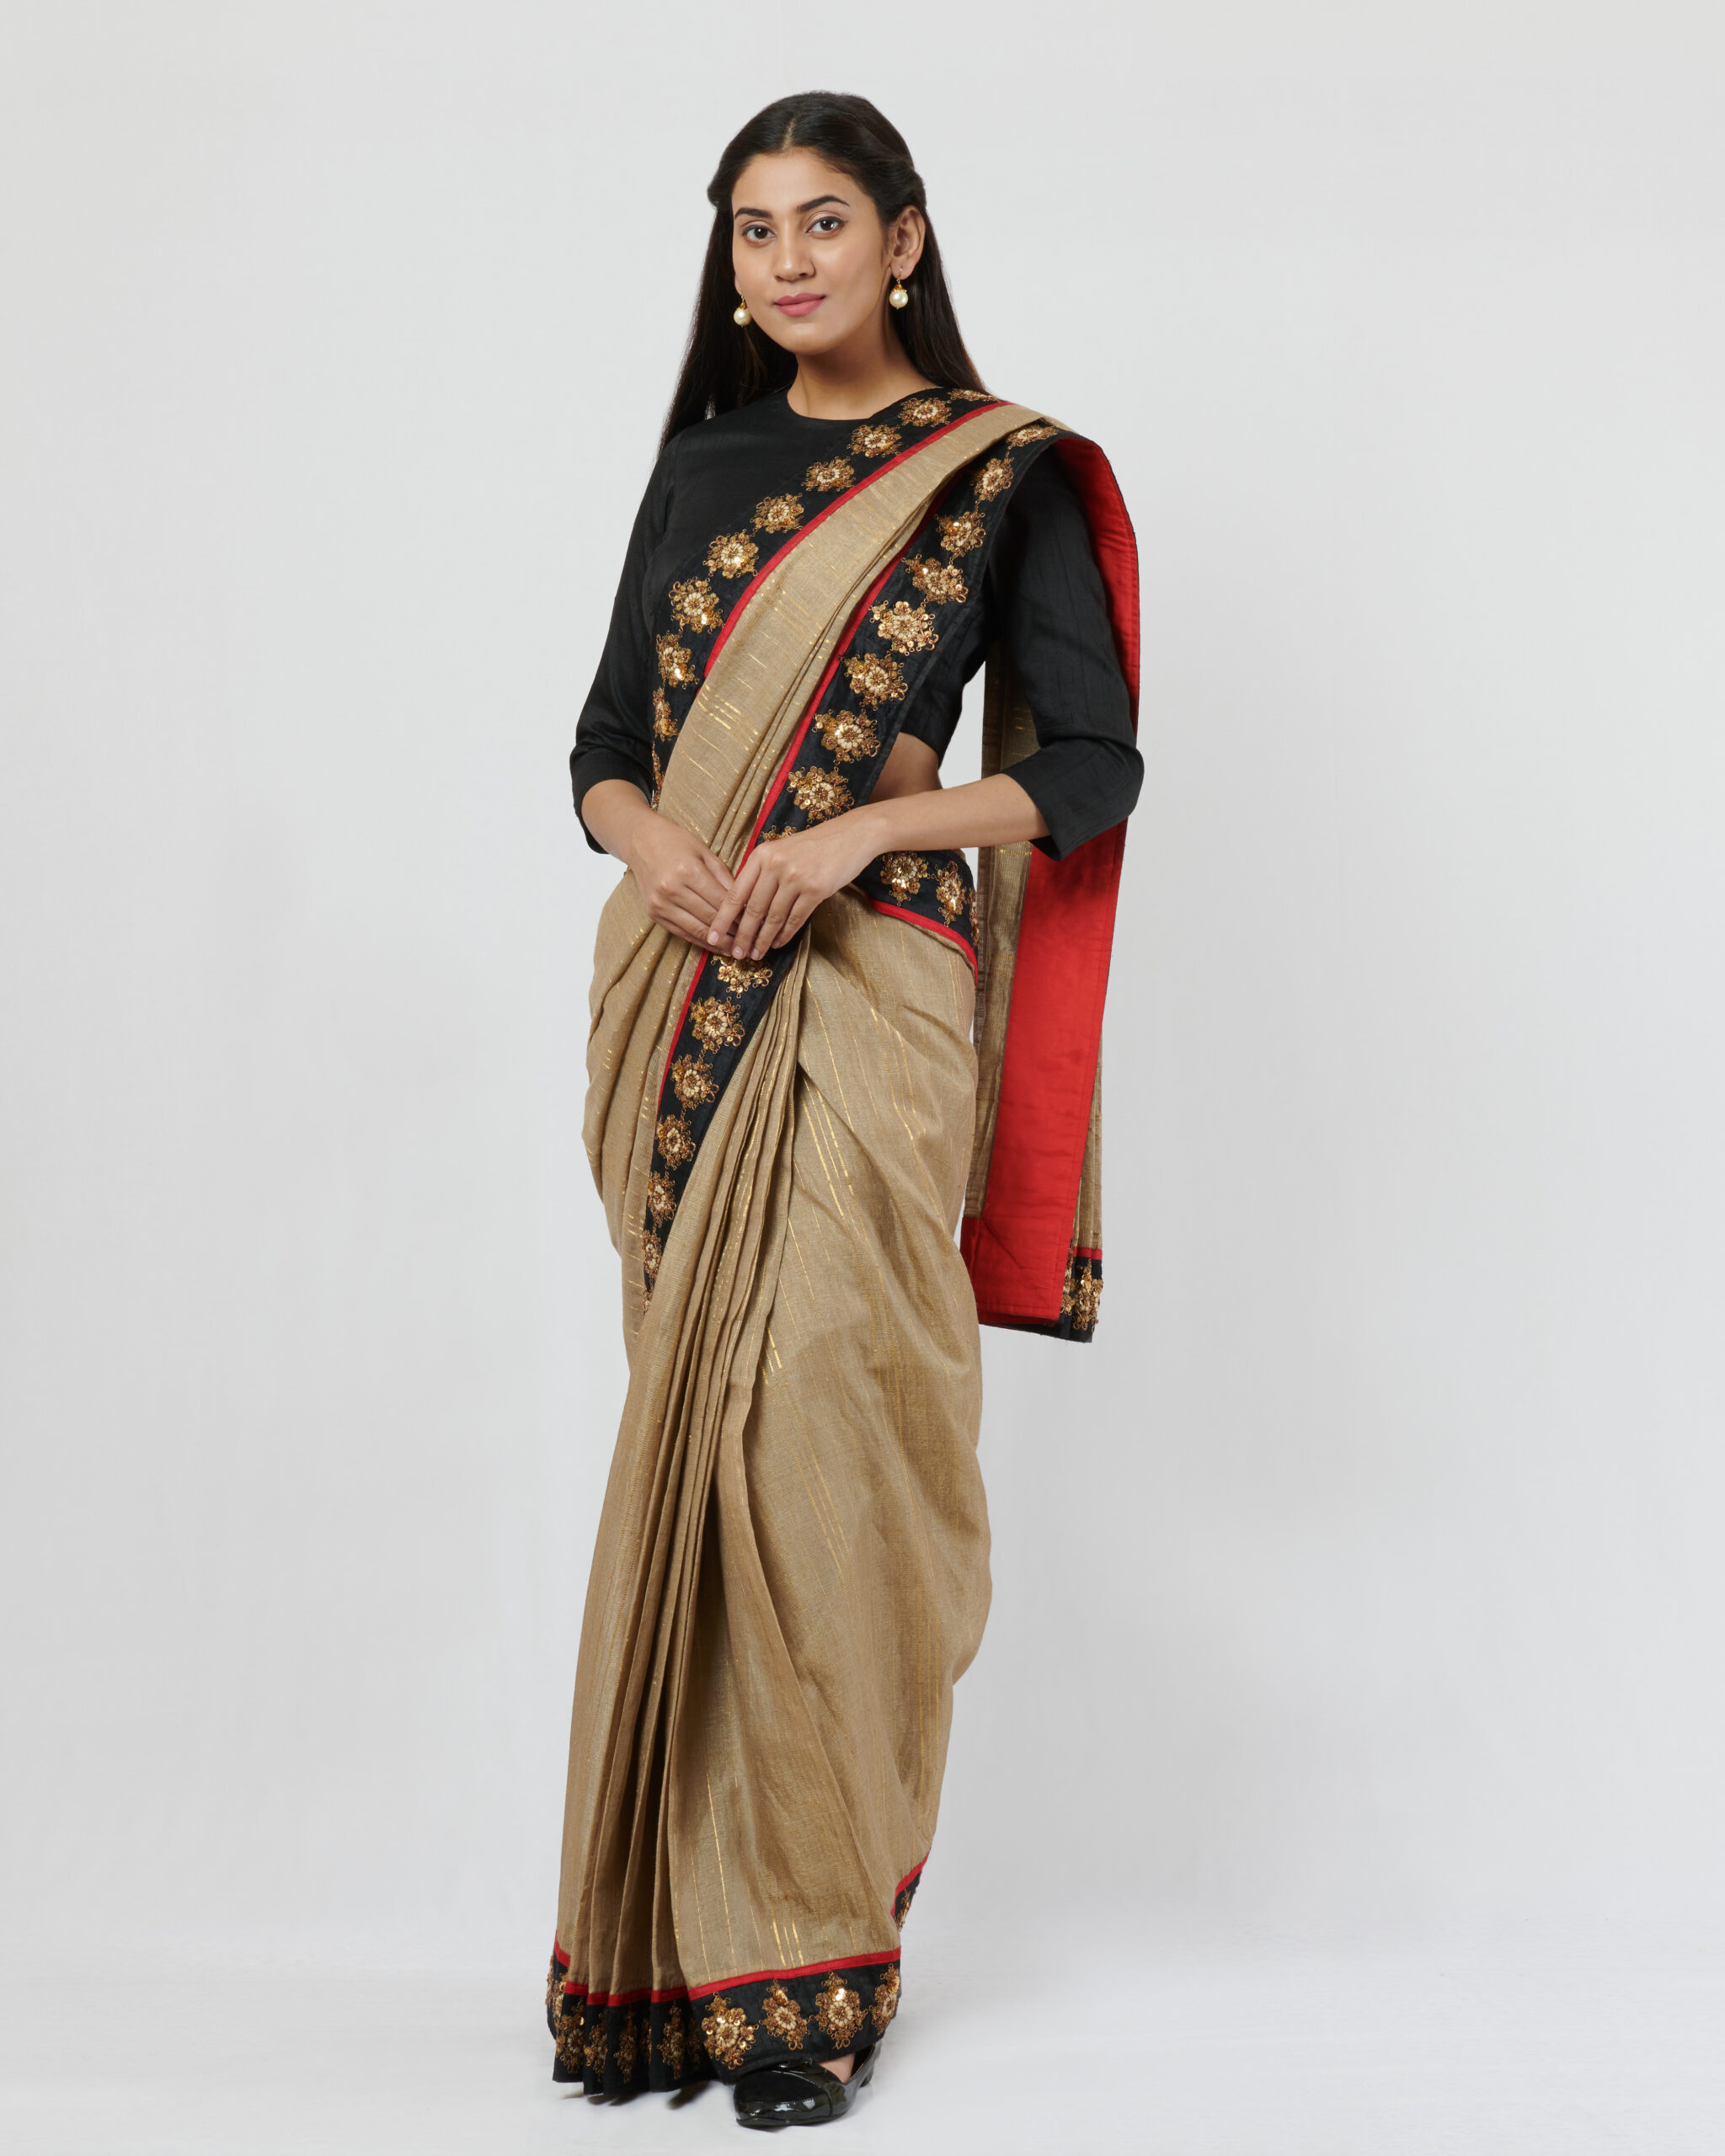 jute silk woven sari with dori and dabka hand embroidery border highlighted with woven gold lines